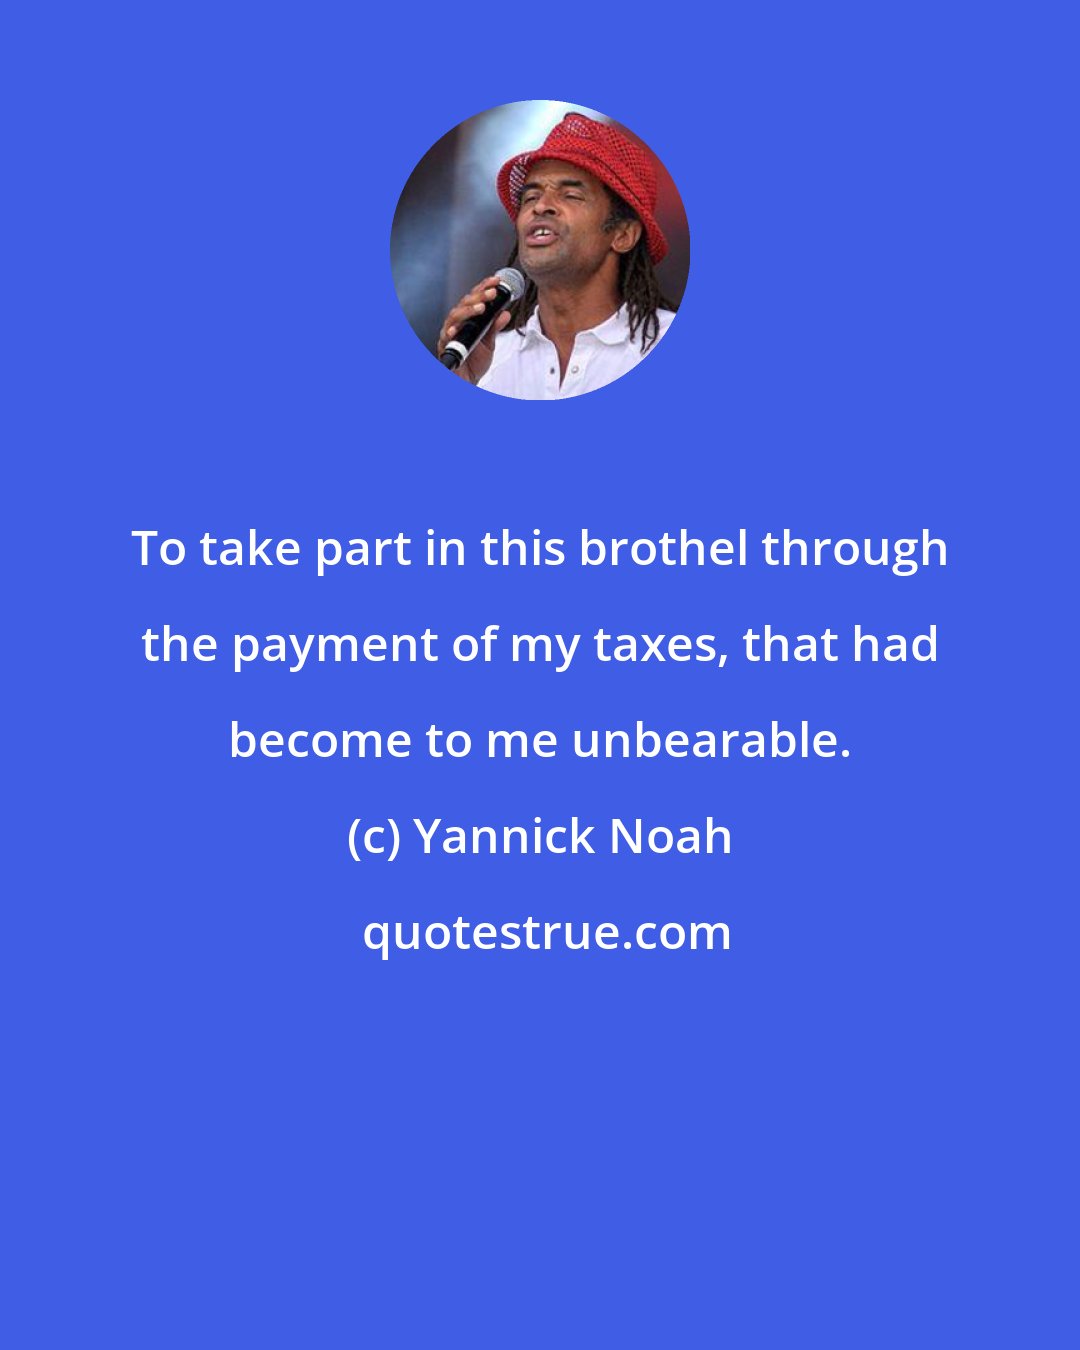 Yannick Noah: To take part in this brothel through the payment of my taxes, that had become to me unbearable.